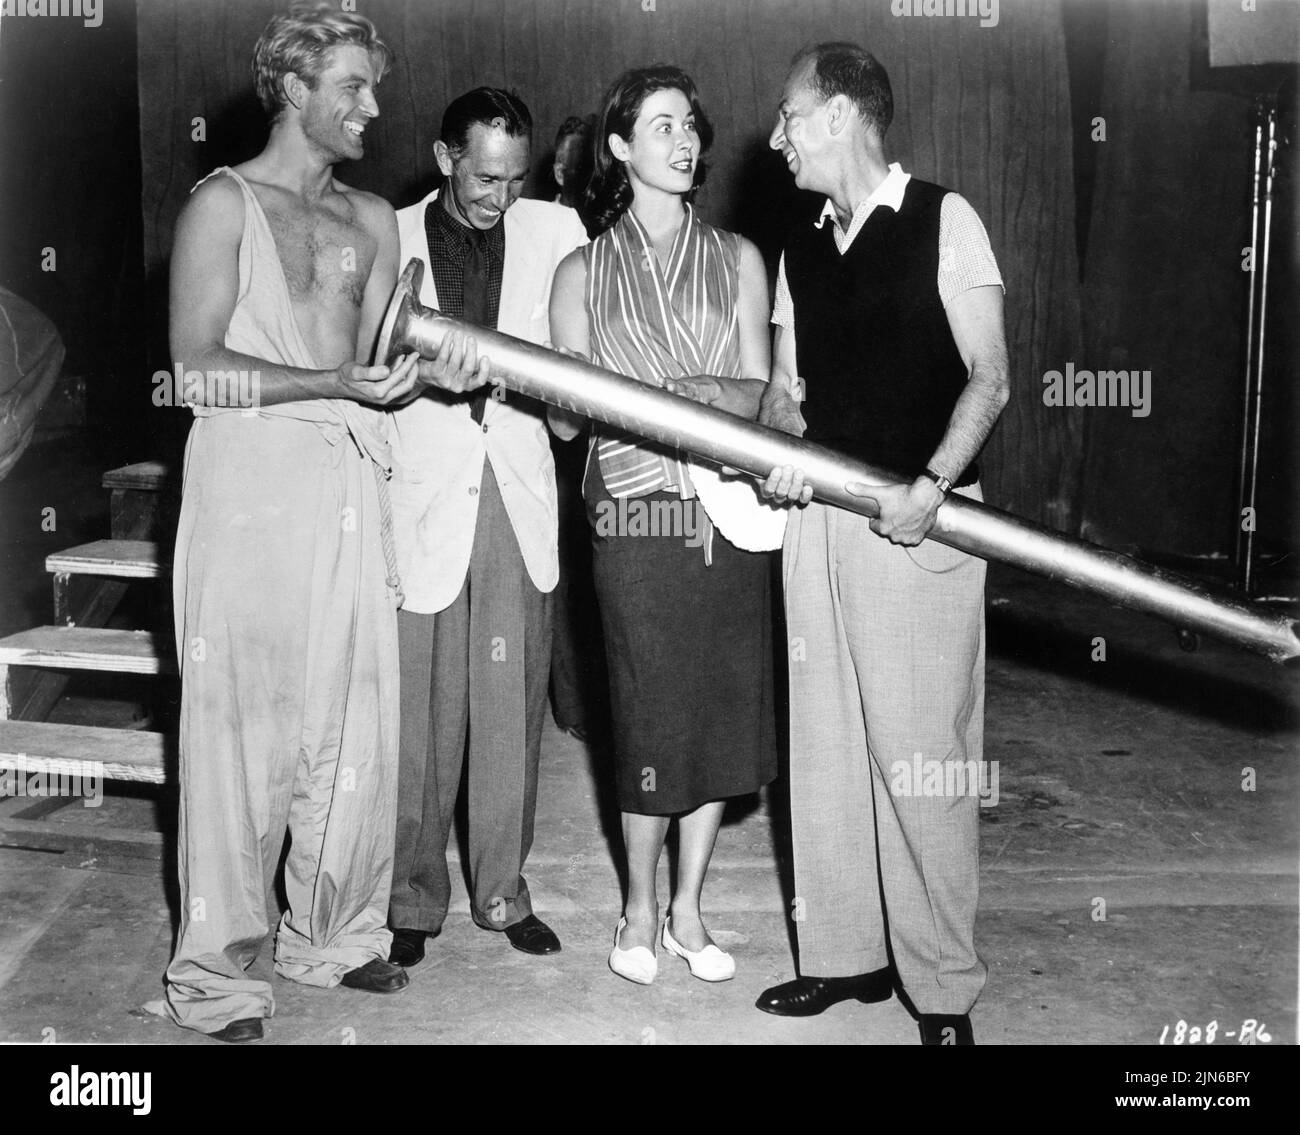 GRANT WILLIAMS and Director JACK ARNOLD show prop nail to Set Visitors GIA SCALA and JOSE FERRER on set candid during filming of THE INCREDIBLE SHRINKING MAN 1957 director JACK ARNOLD novel / screenplay Richard Mathison producer Albert Zugsmith Universal International Pictures (UI) Stock Photo